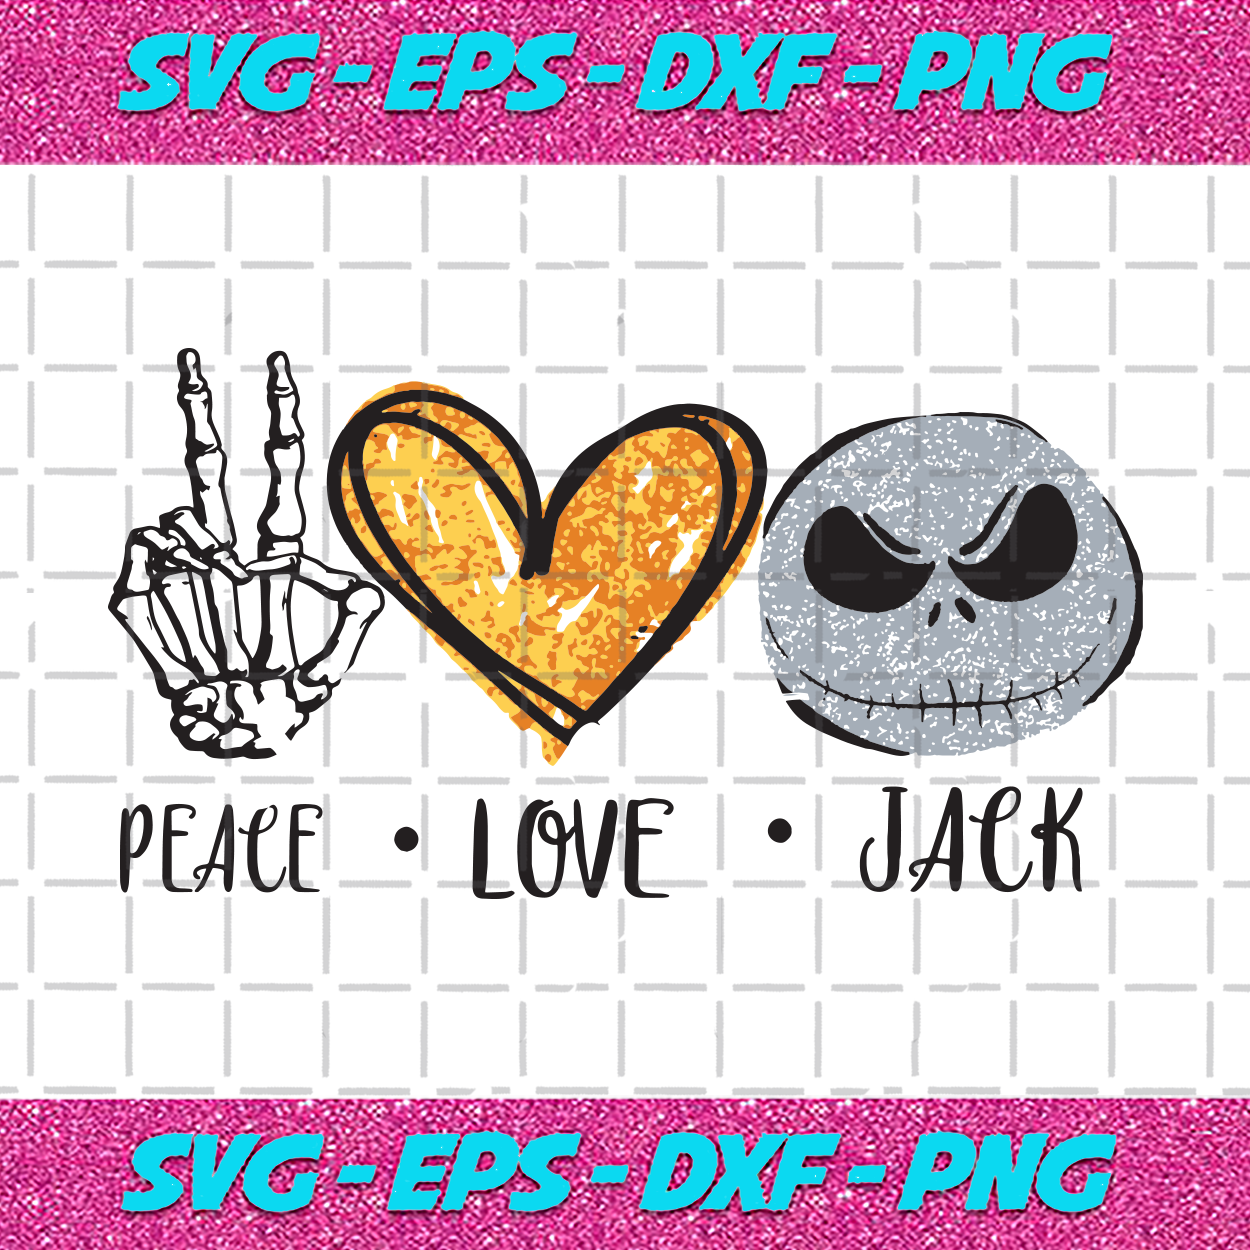 Free Free 151 Peace Love Nightmare Svg SVG PNG EPS DXF File